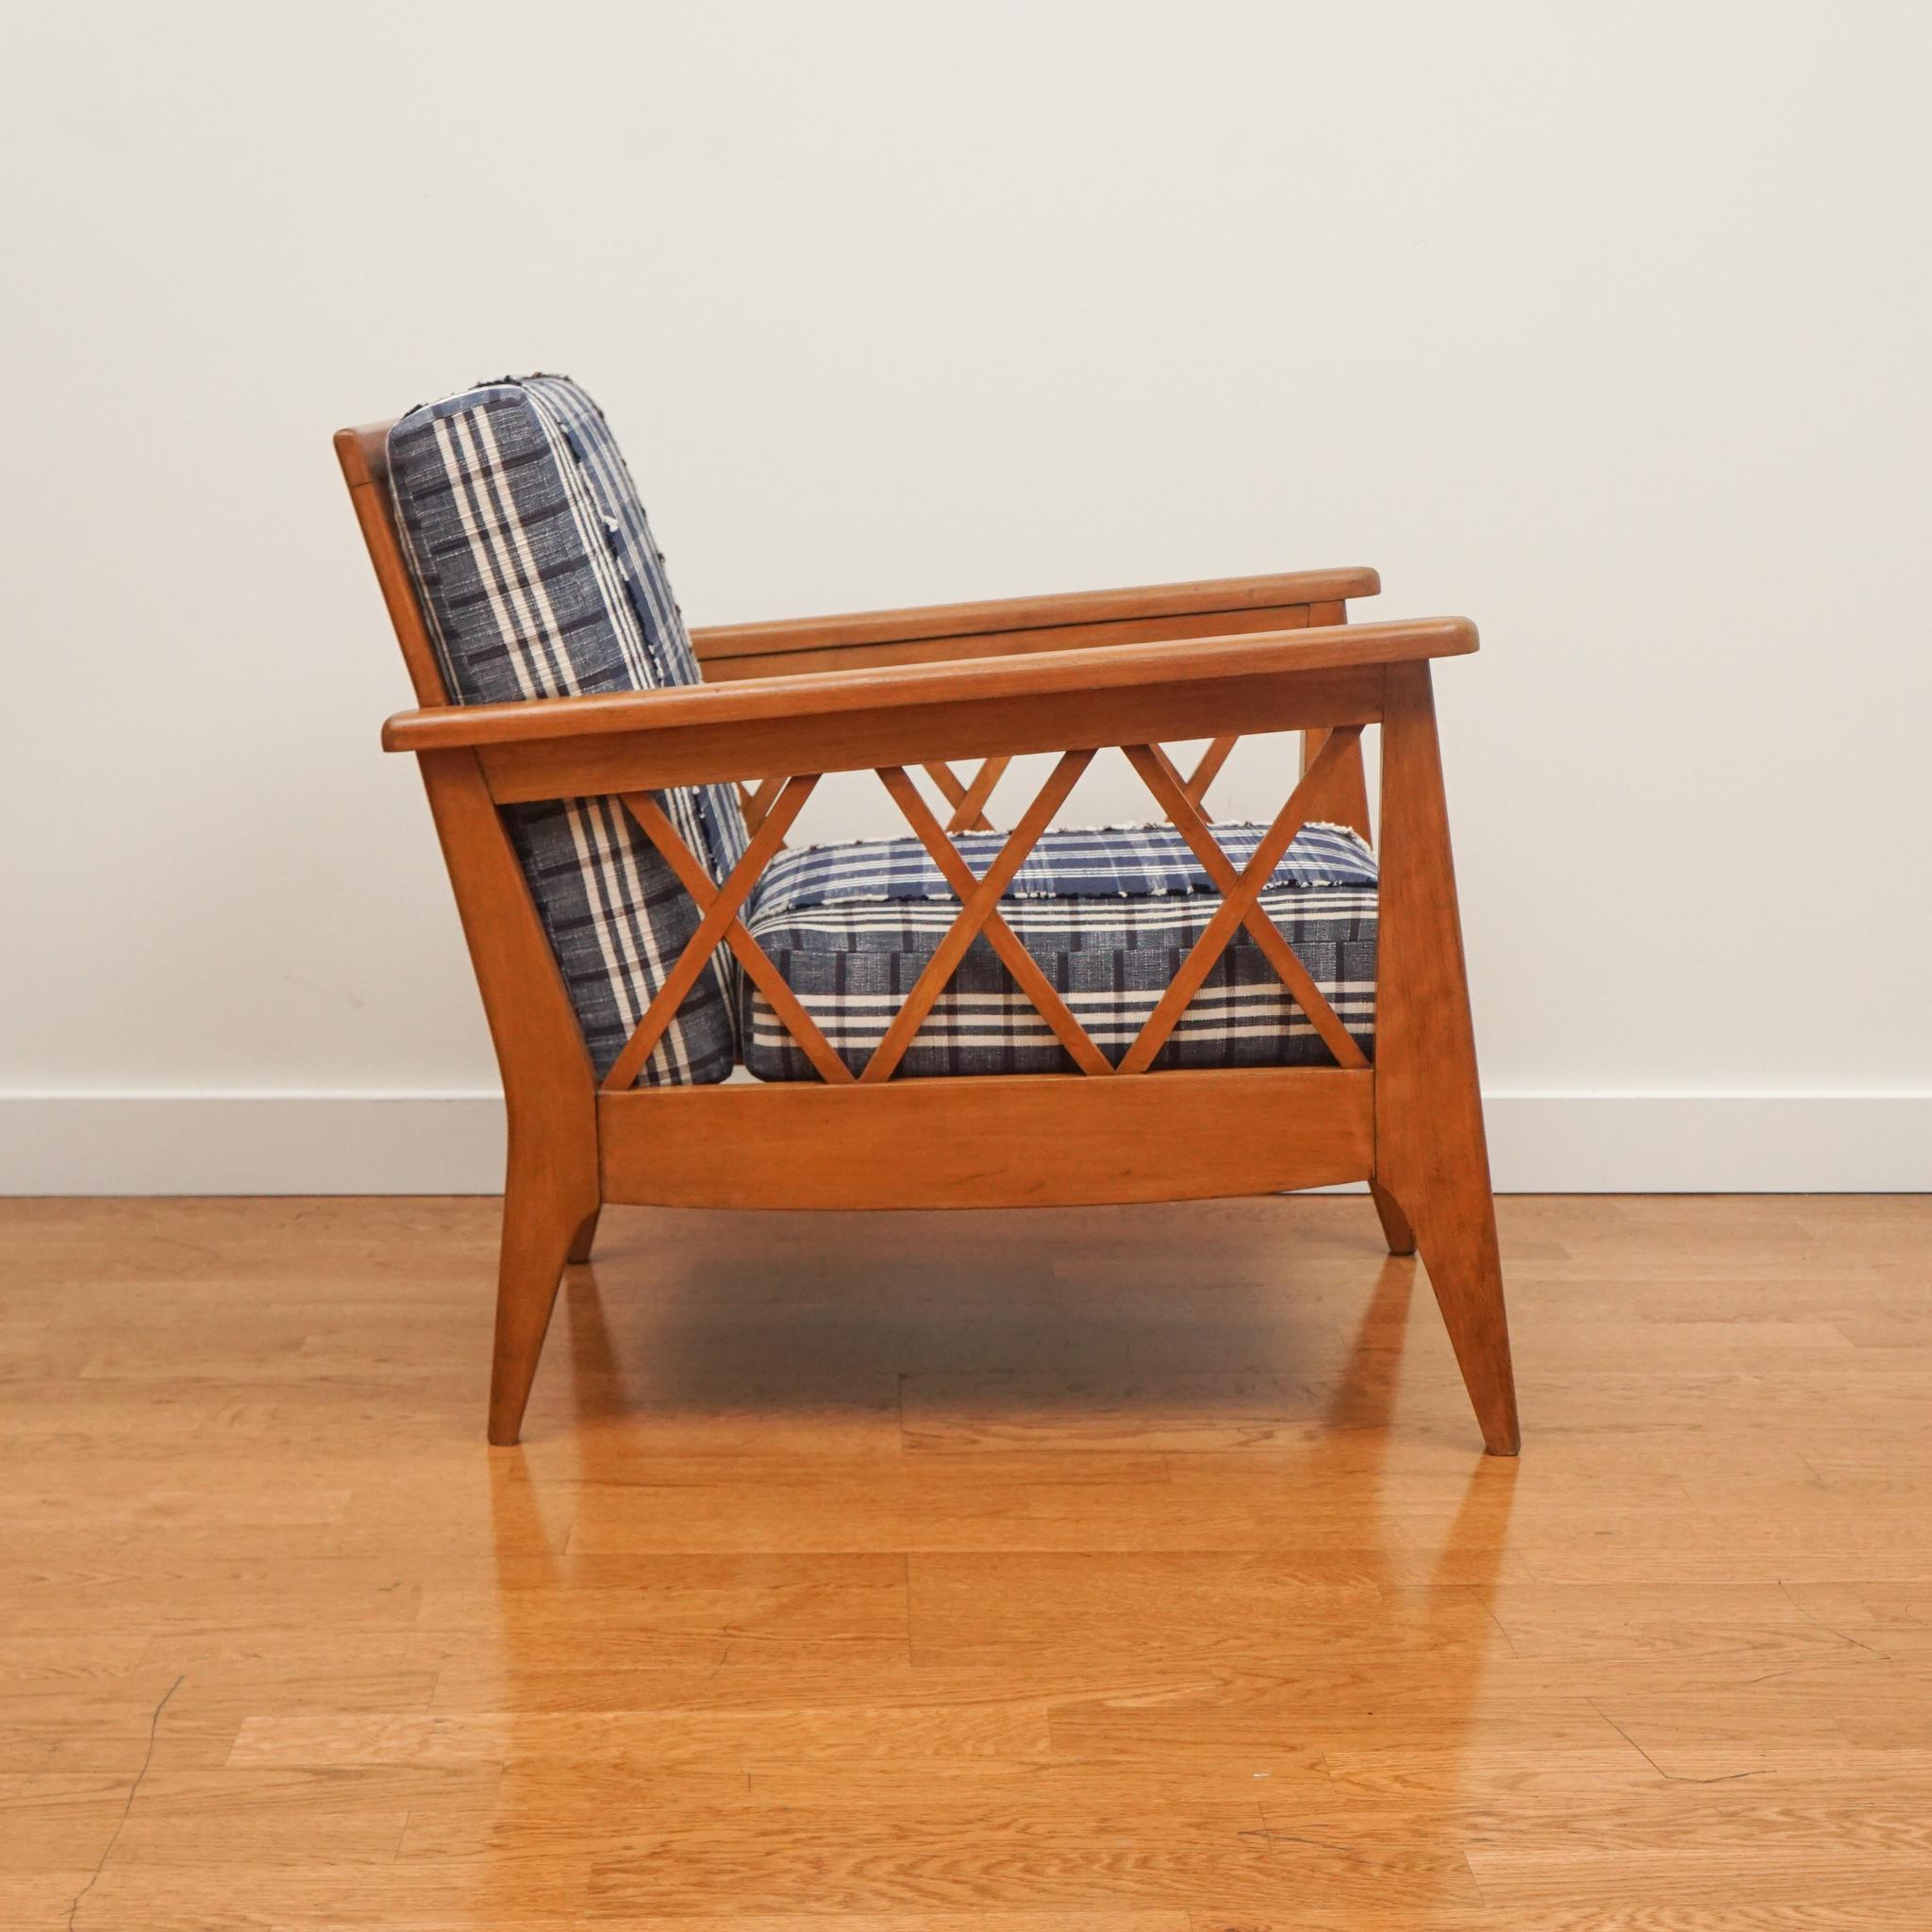 20th Century French Modernist Arm Chair with Loose Seat and Back Cushions For Sale